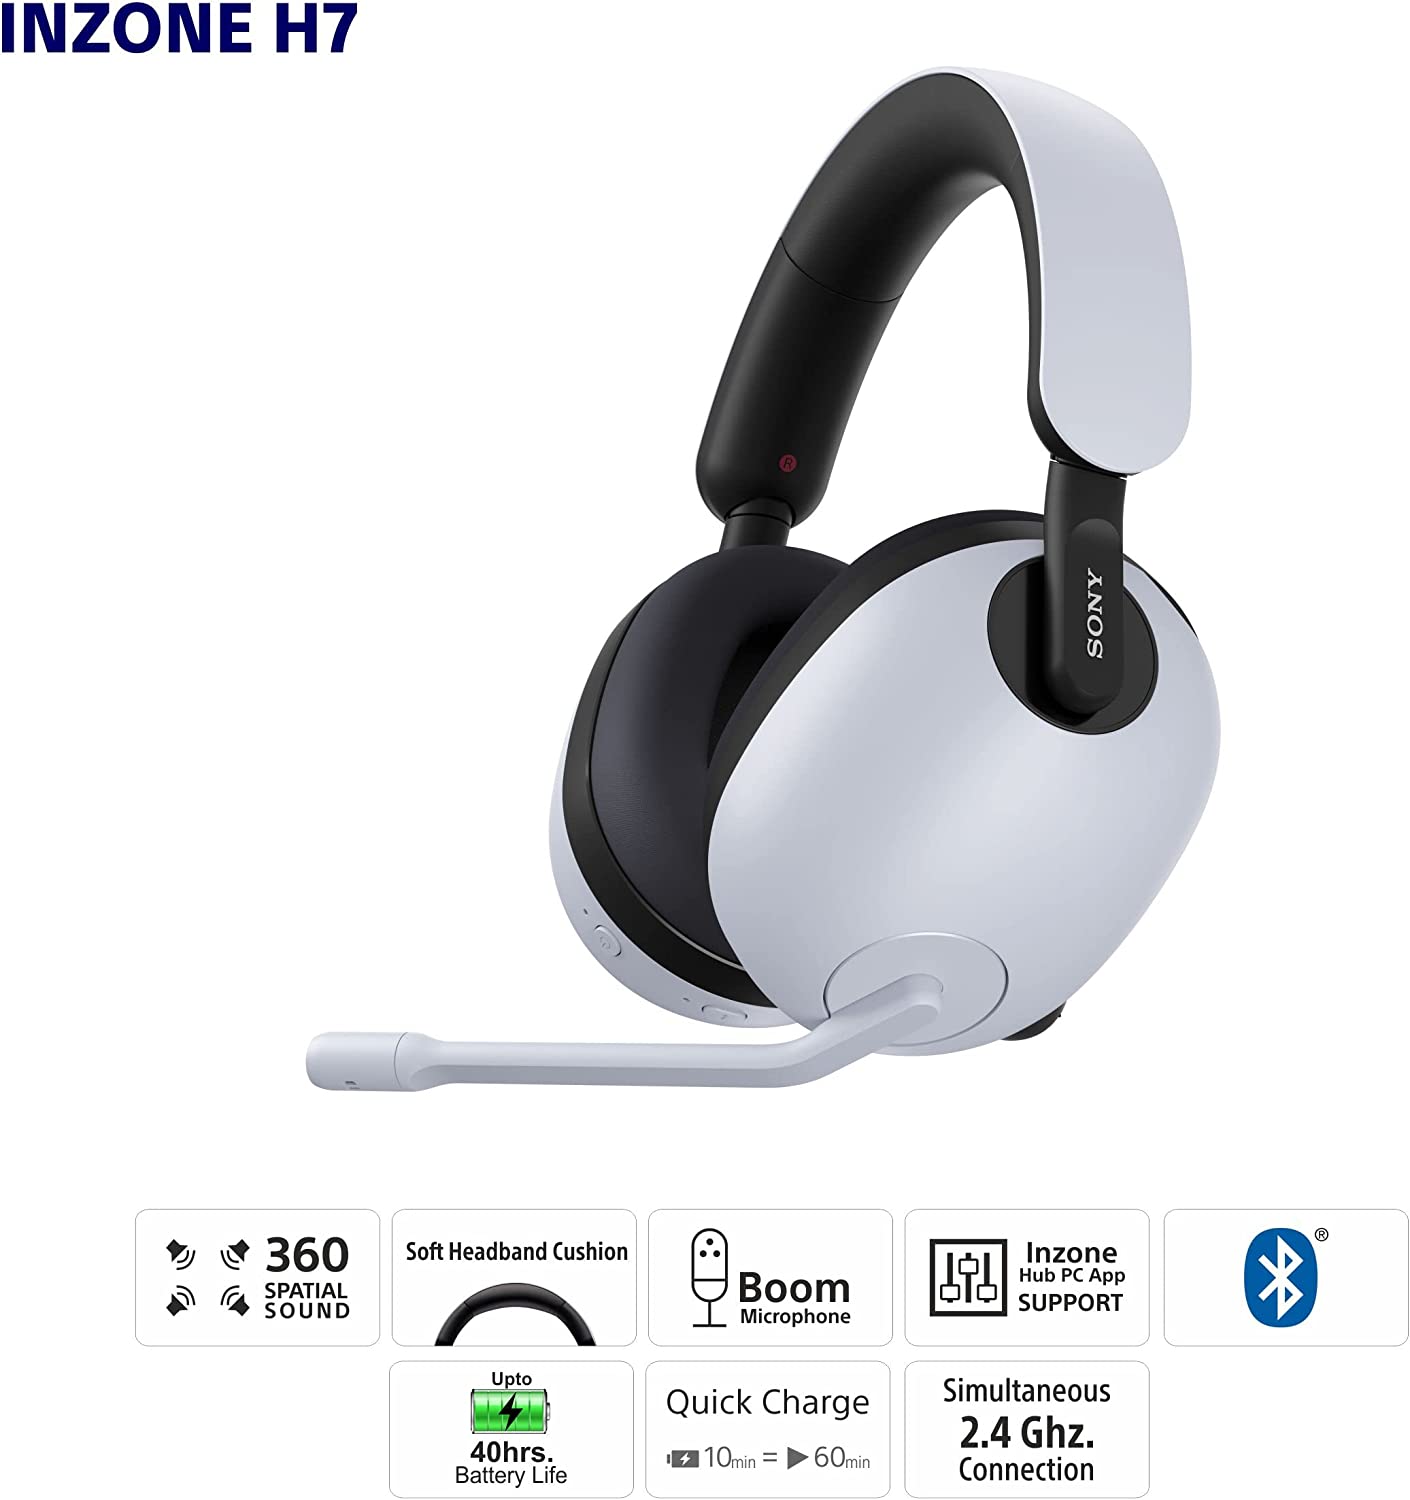 Sony-INZONE H7 Wireless Gaming Headset For PC and PlayStation 5